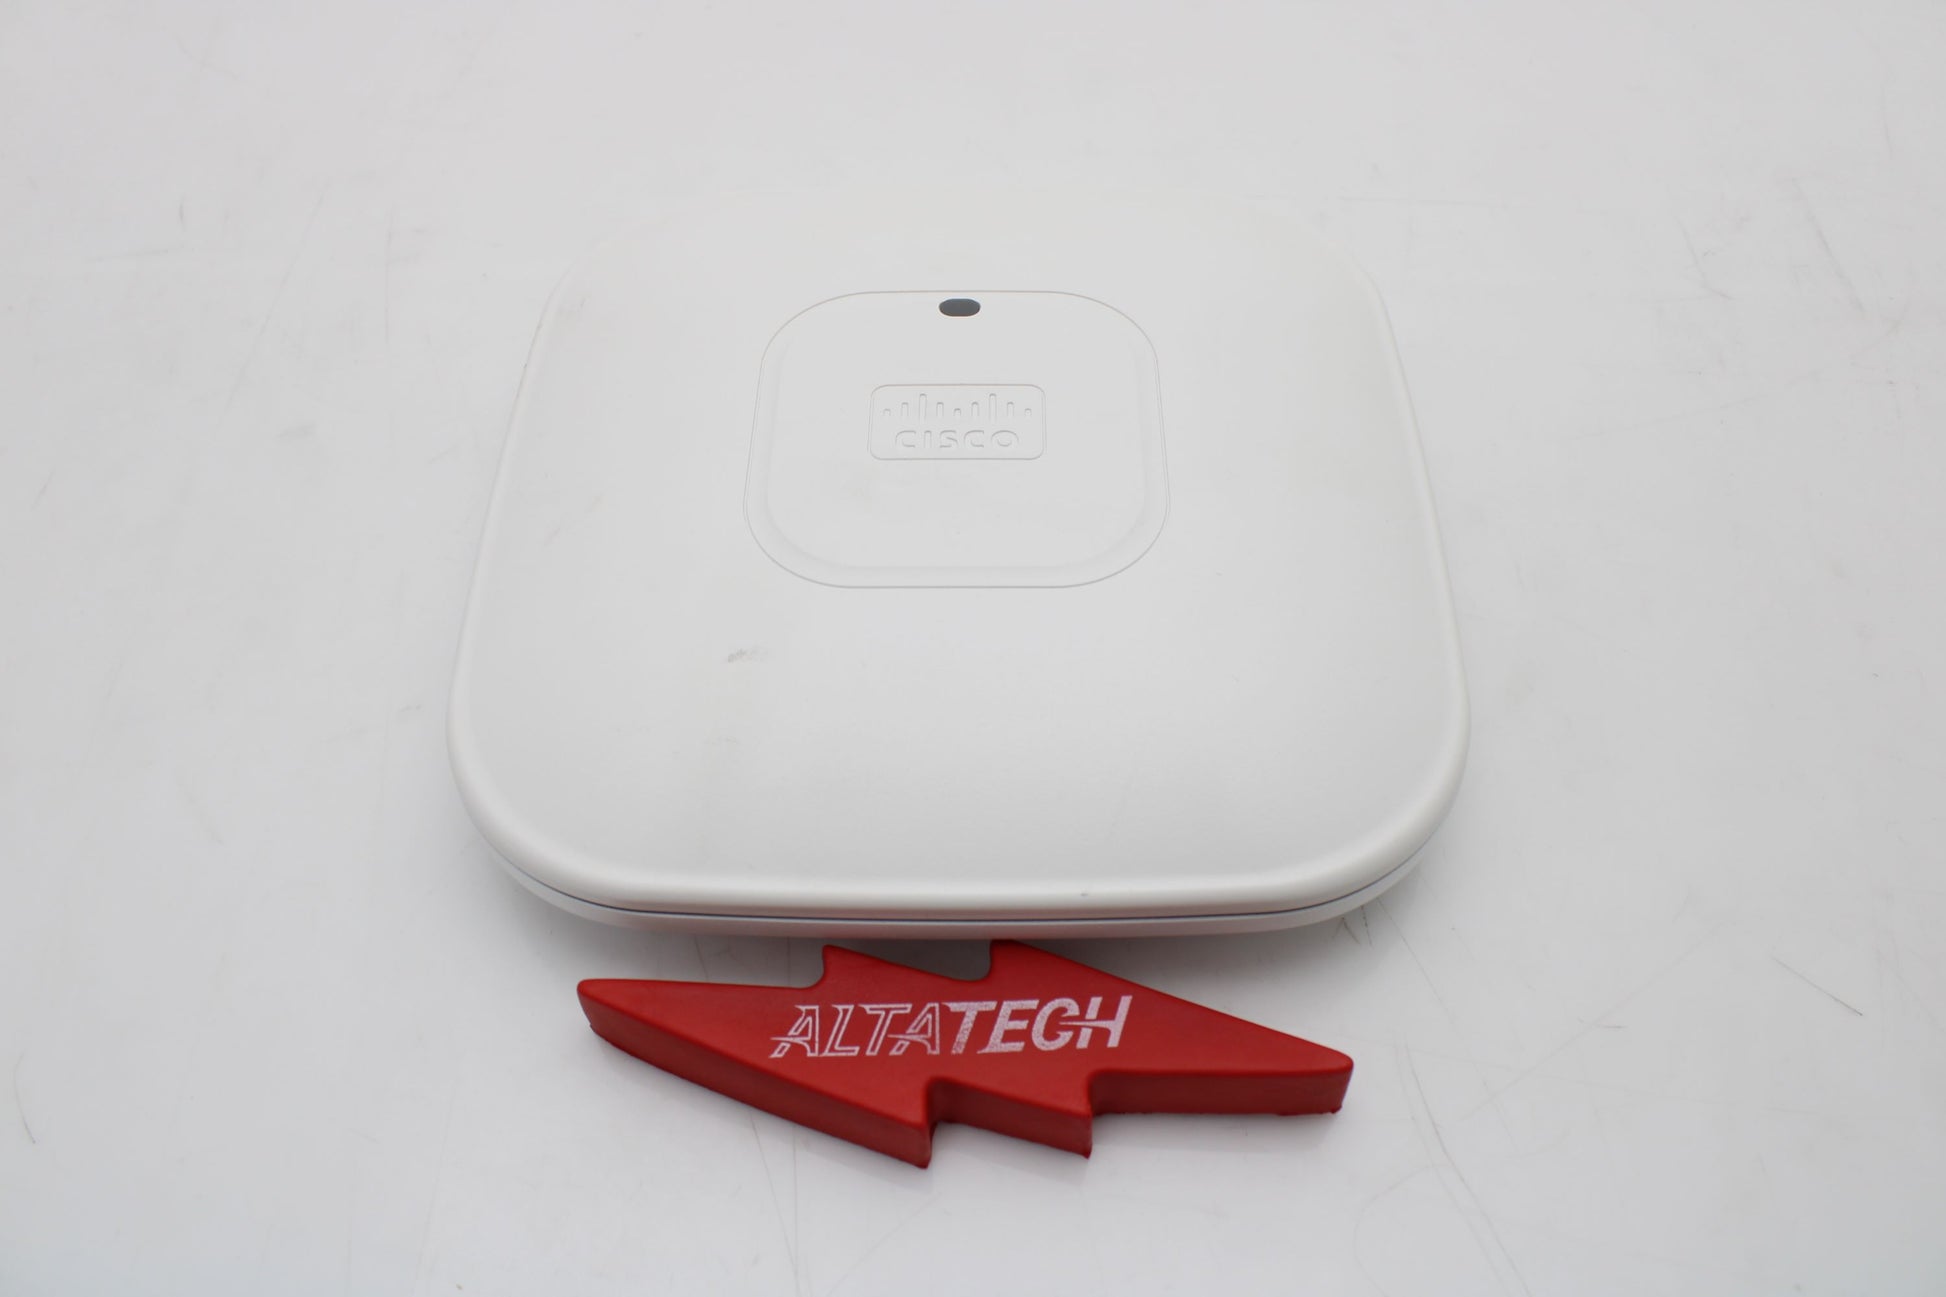 Cisco AIR-SAP2602I-A-K9 AIR-SAP2602I-A-K9 Cisco AIRONET 2602 Access Point, Used